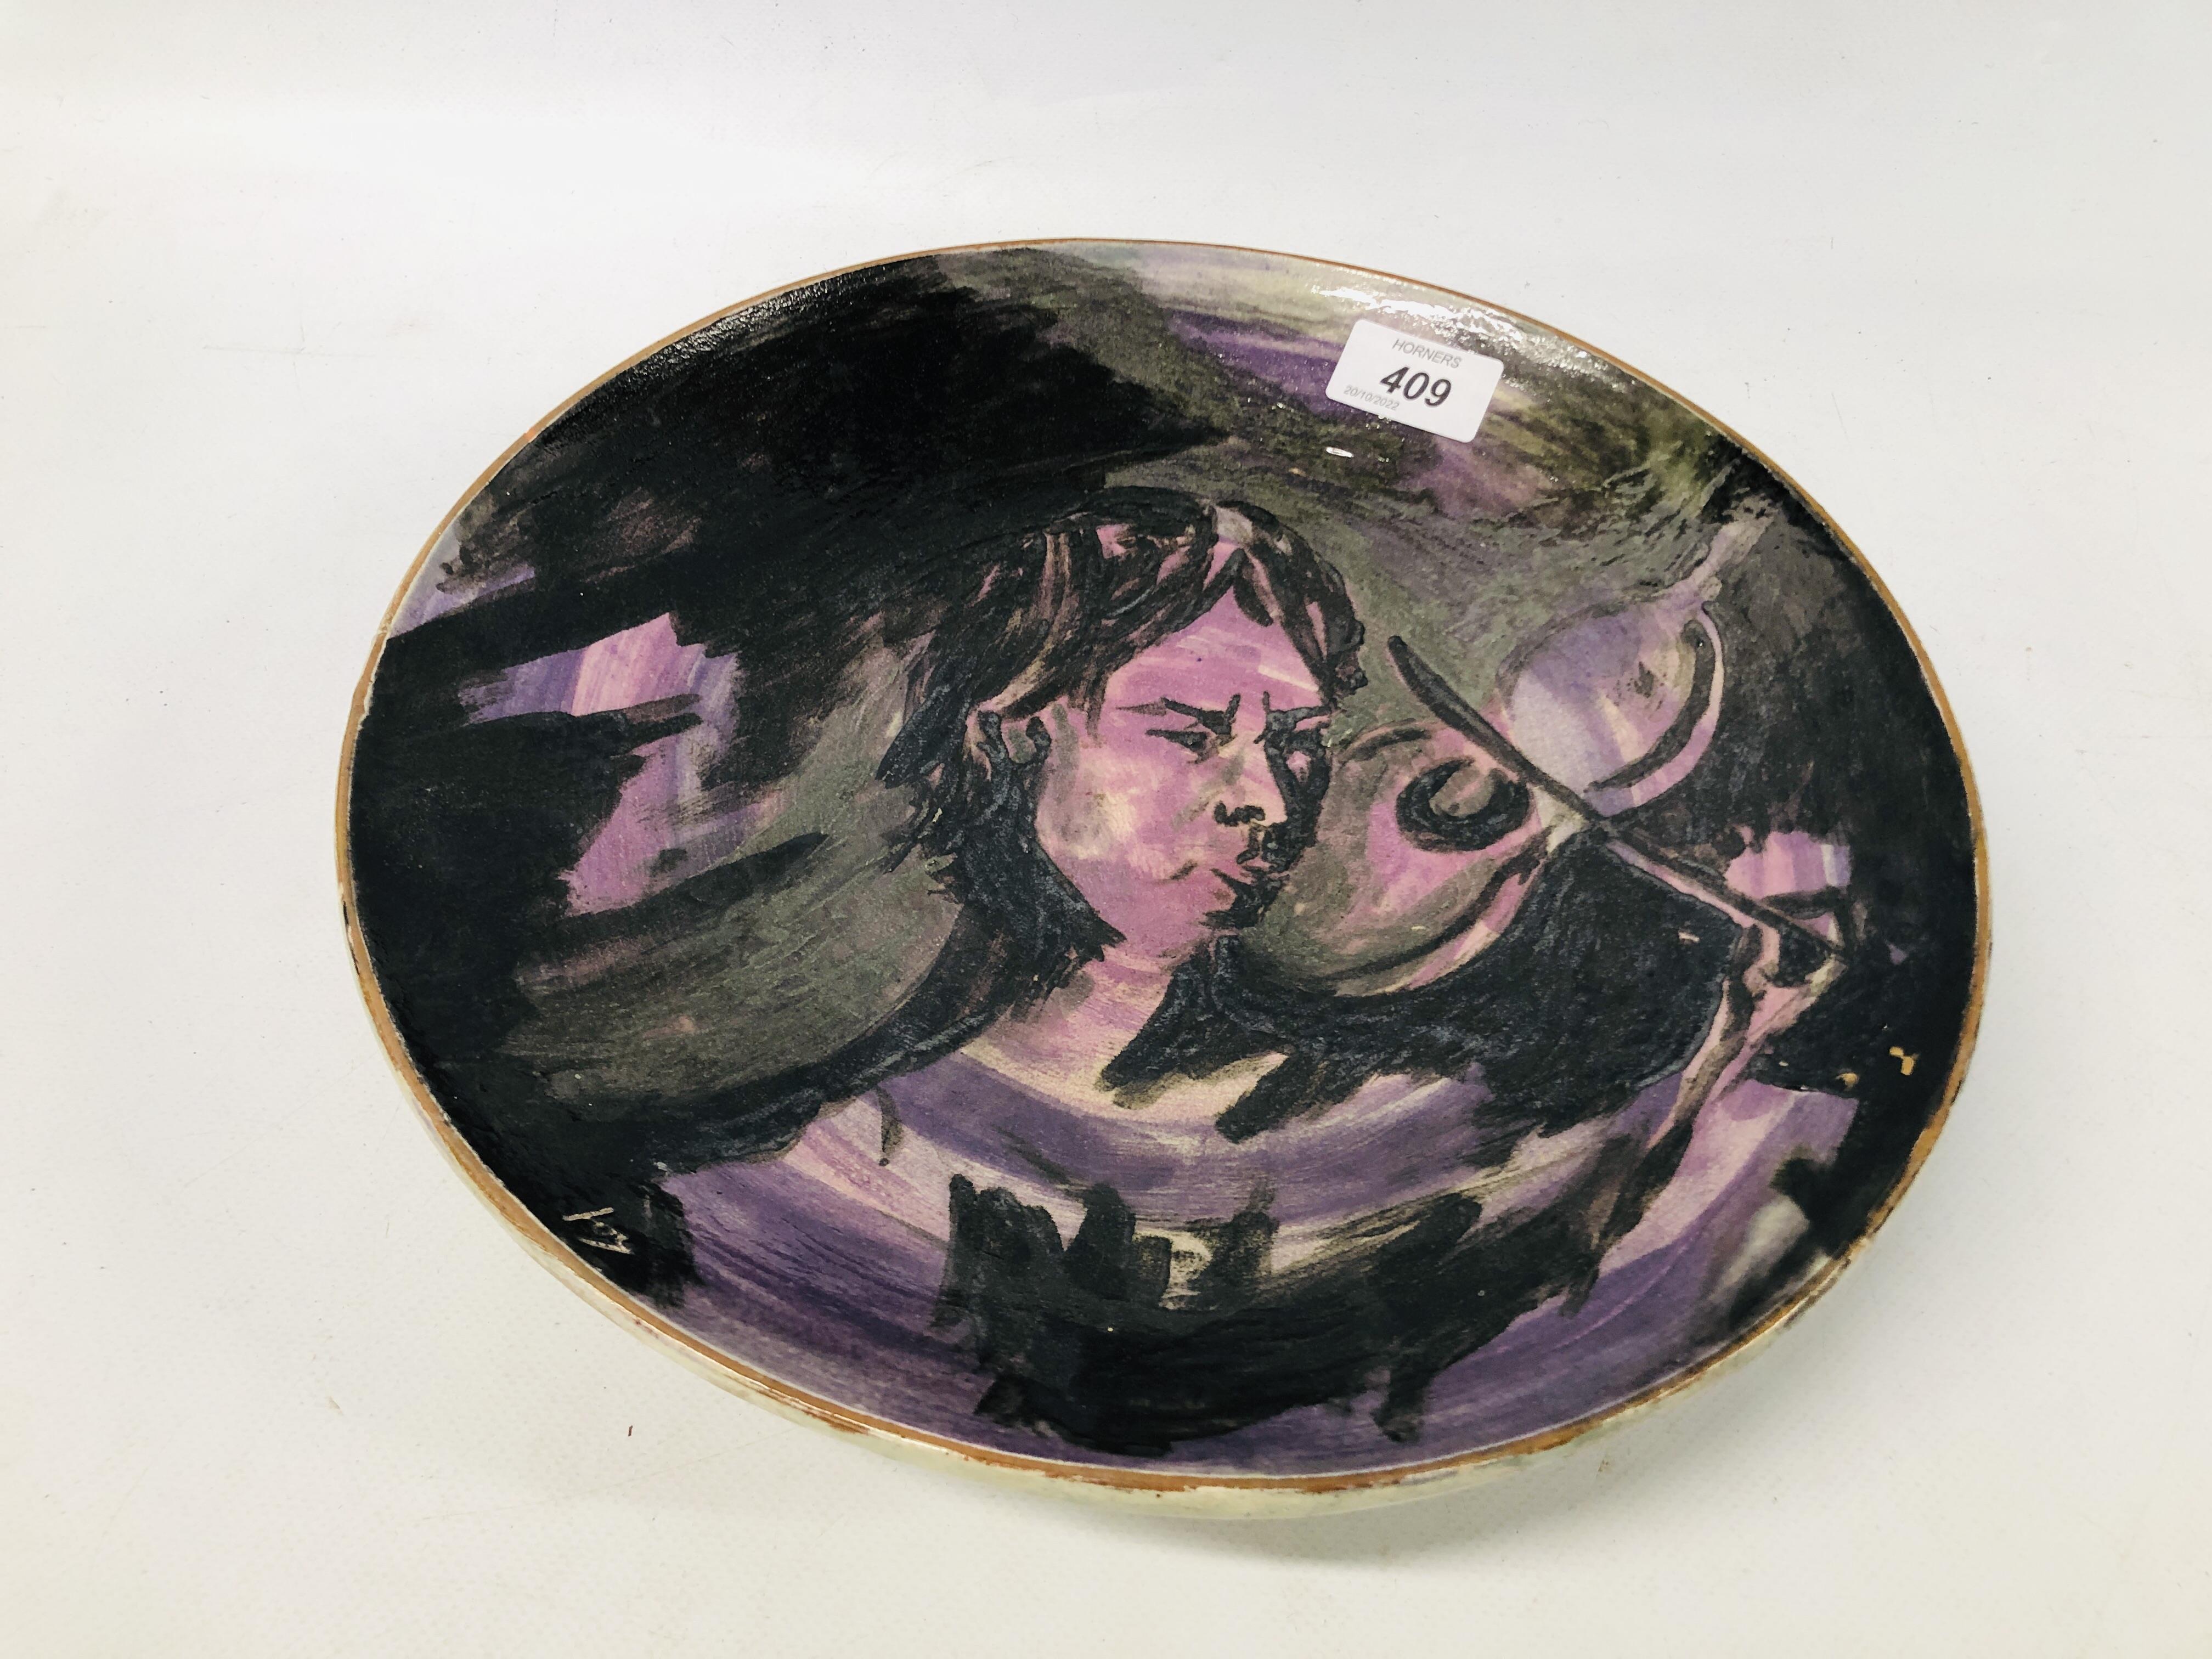 CONTINENTAL STUDIO POTTERY BOWL DECORATED WITH A VIOLINIST "LA BISHAL"